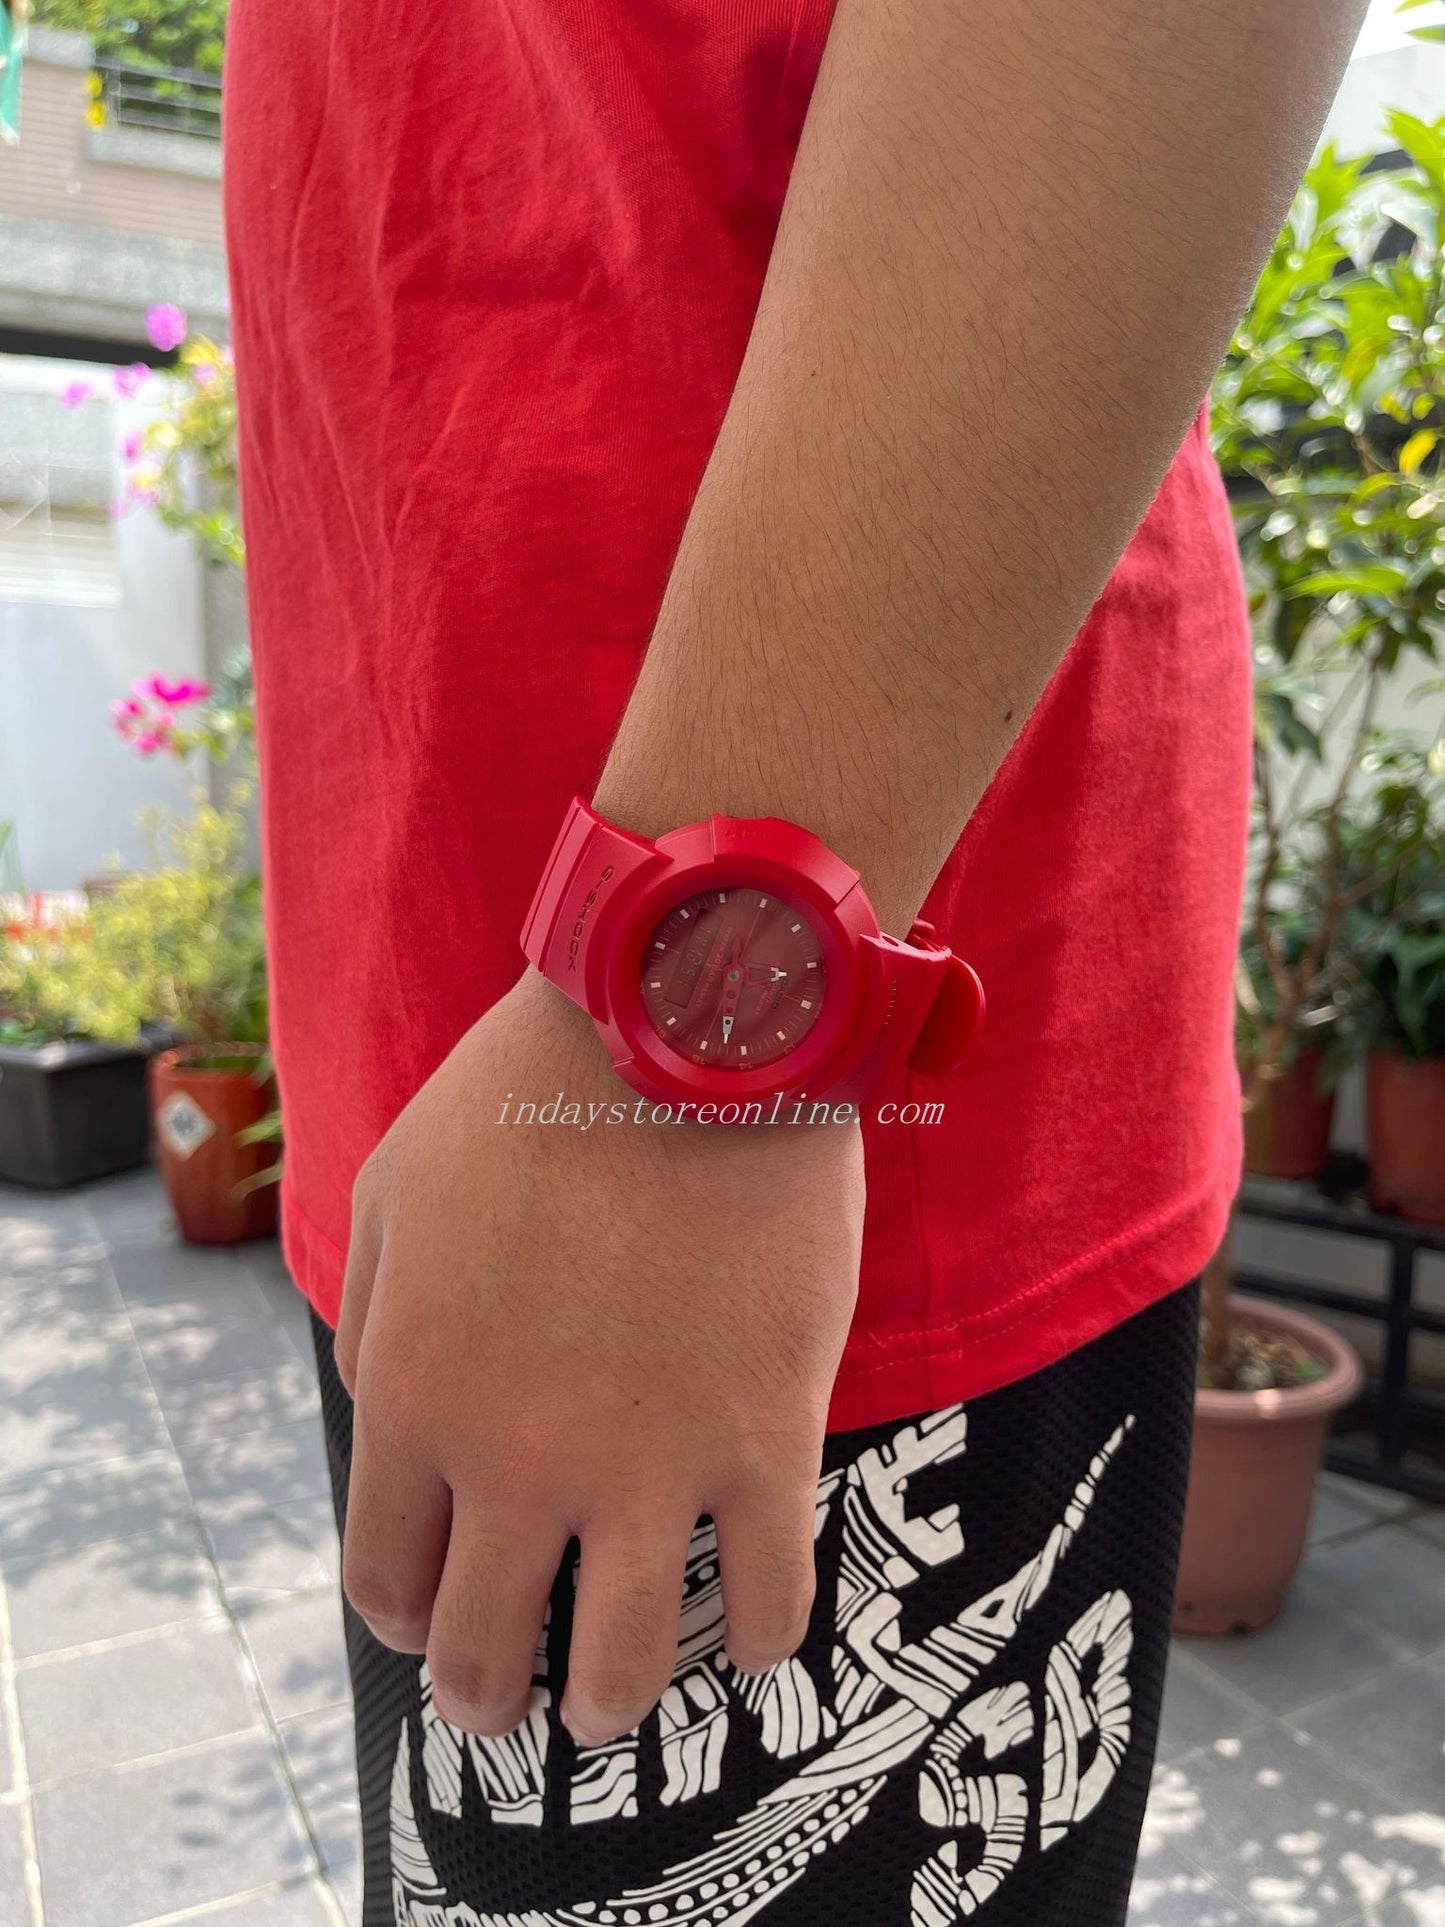 Casio G-Shock Men's Watch AW-500BB-4E Analog-Digital AW-500 Series Red Color Shock Resistant Minimal Design Best Seller